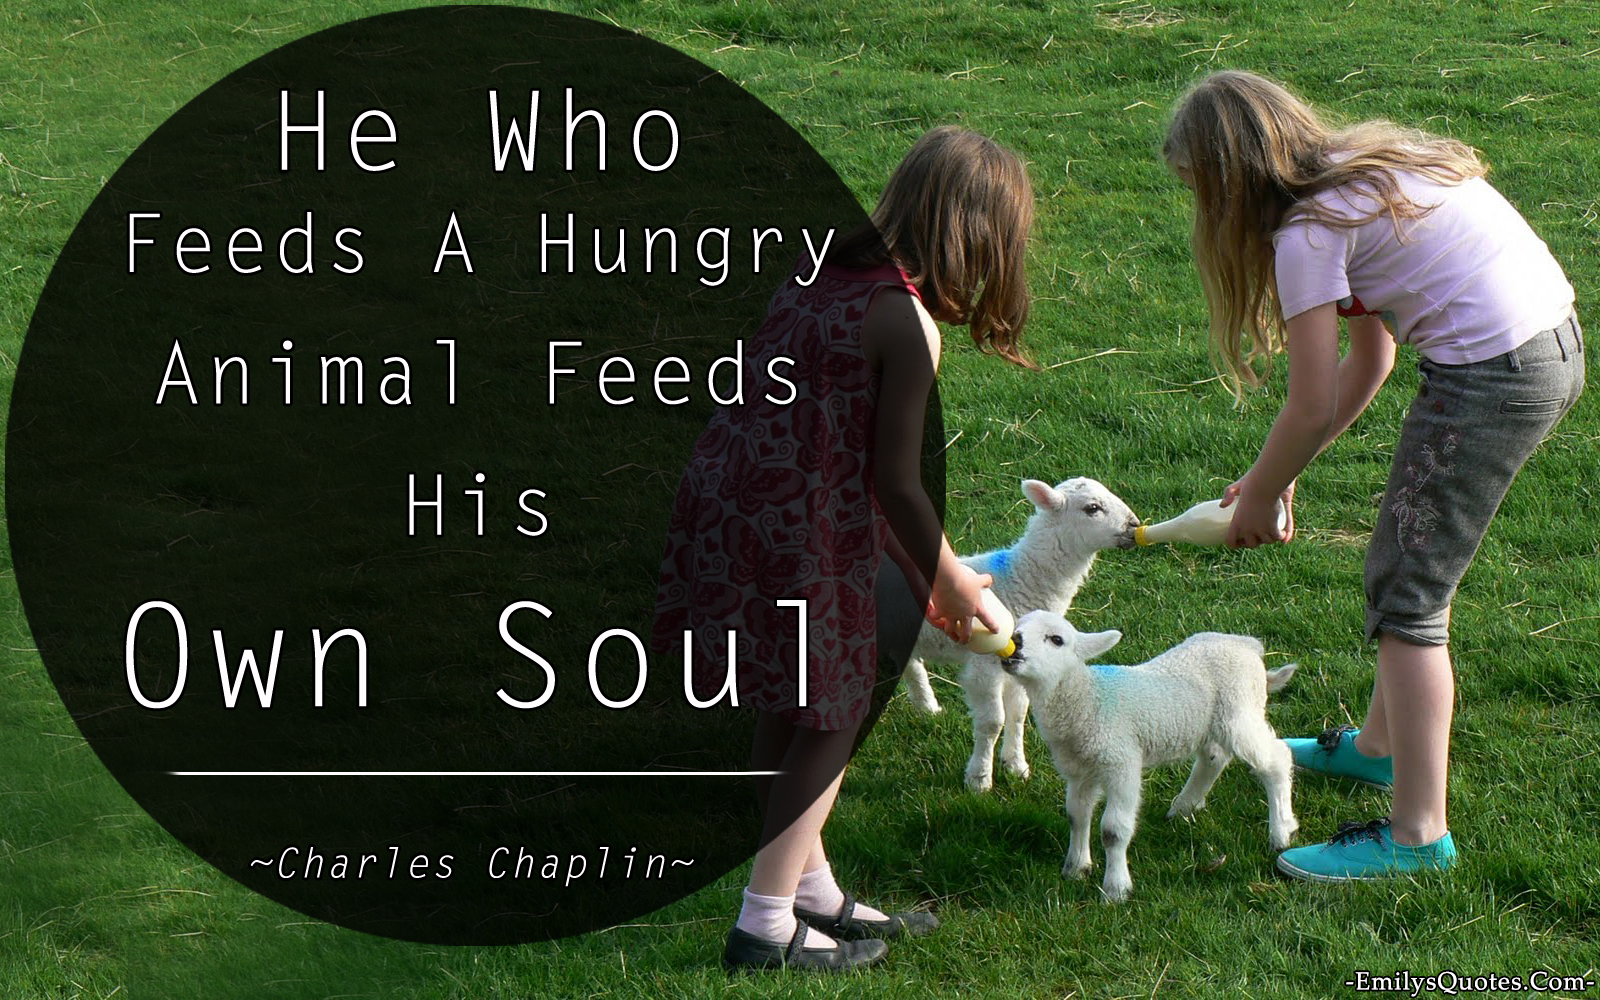 He Who Feeds A Hungry Animal Feeds His Own Soul